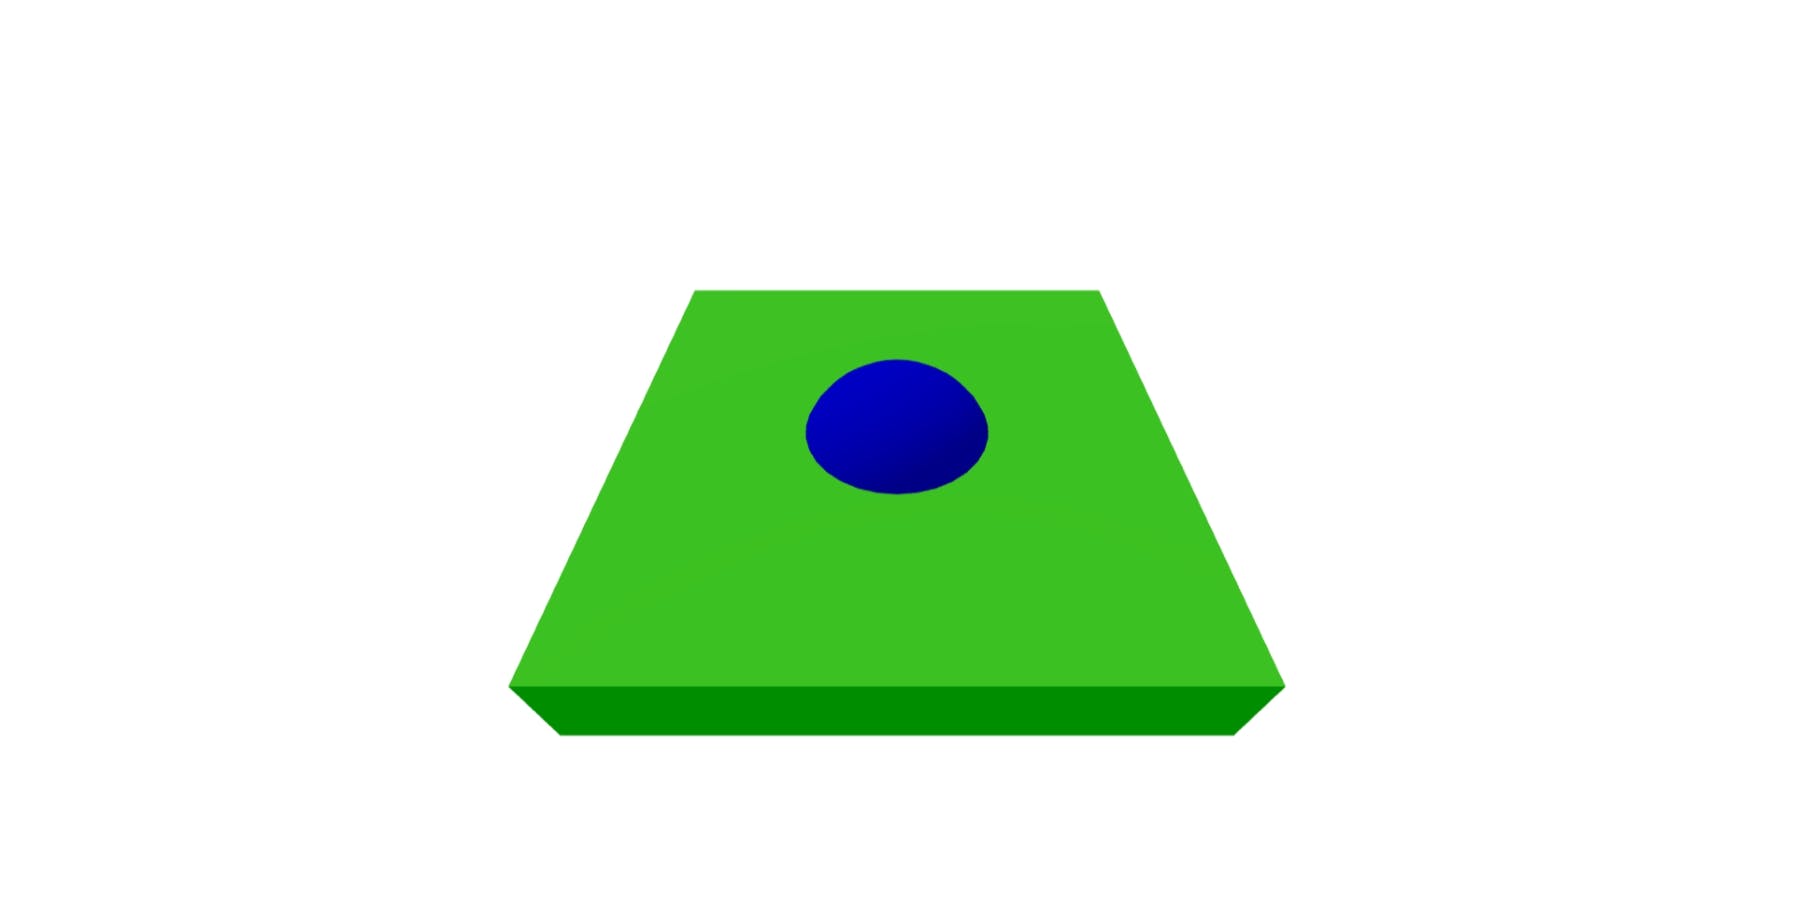 Screenshot of the 3D scene. At this stage, there's a green box that creates the floor of the scene with a blue ball that's stationary at a partially submerged position in the floor.